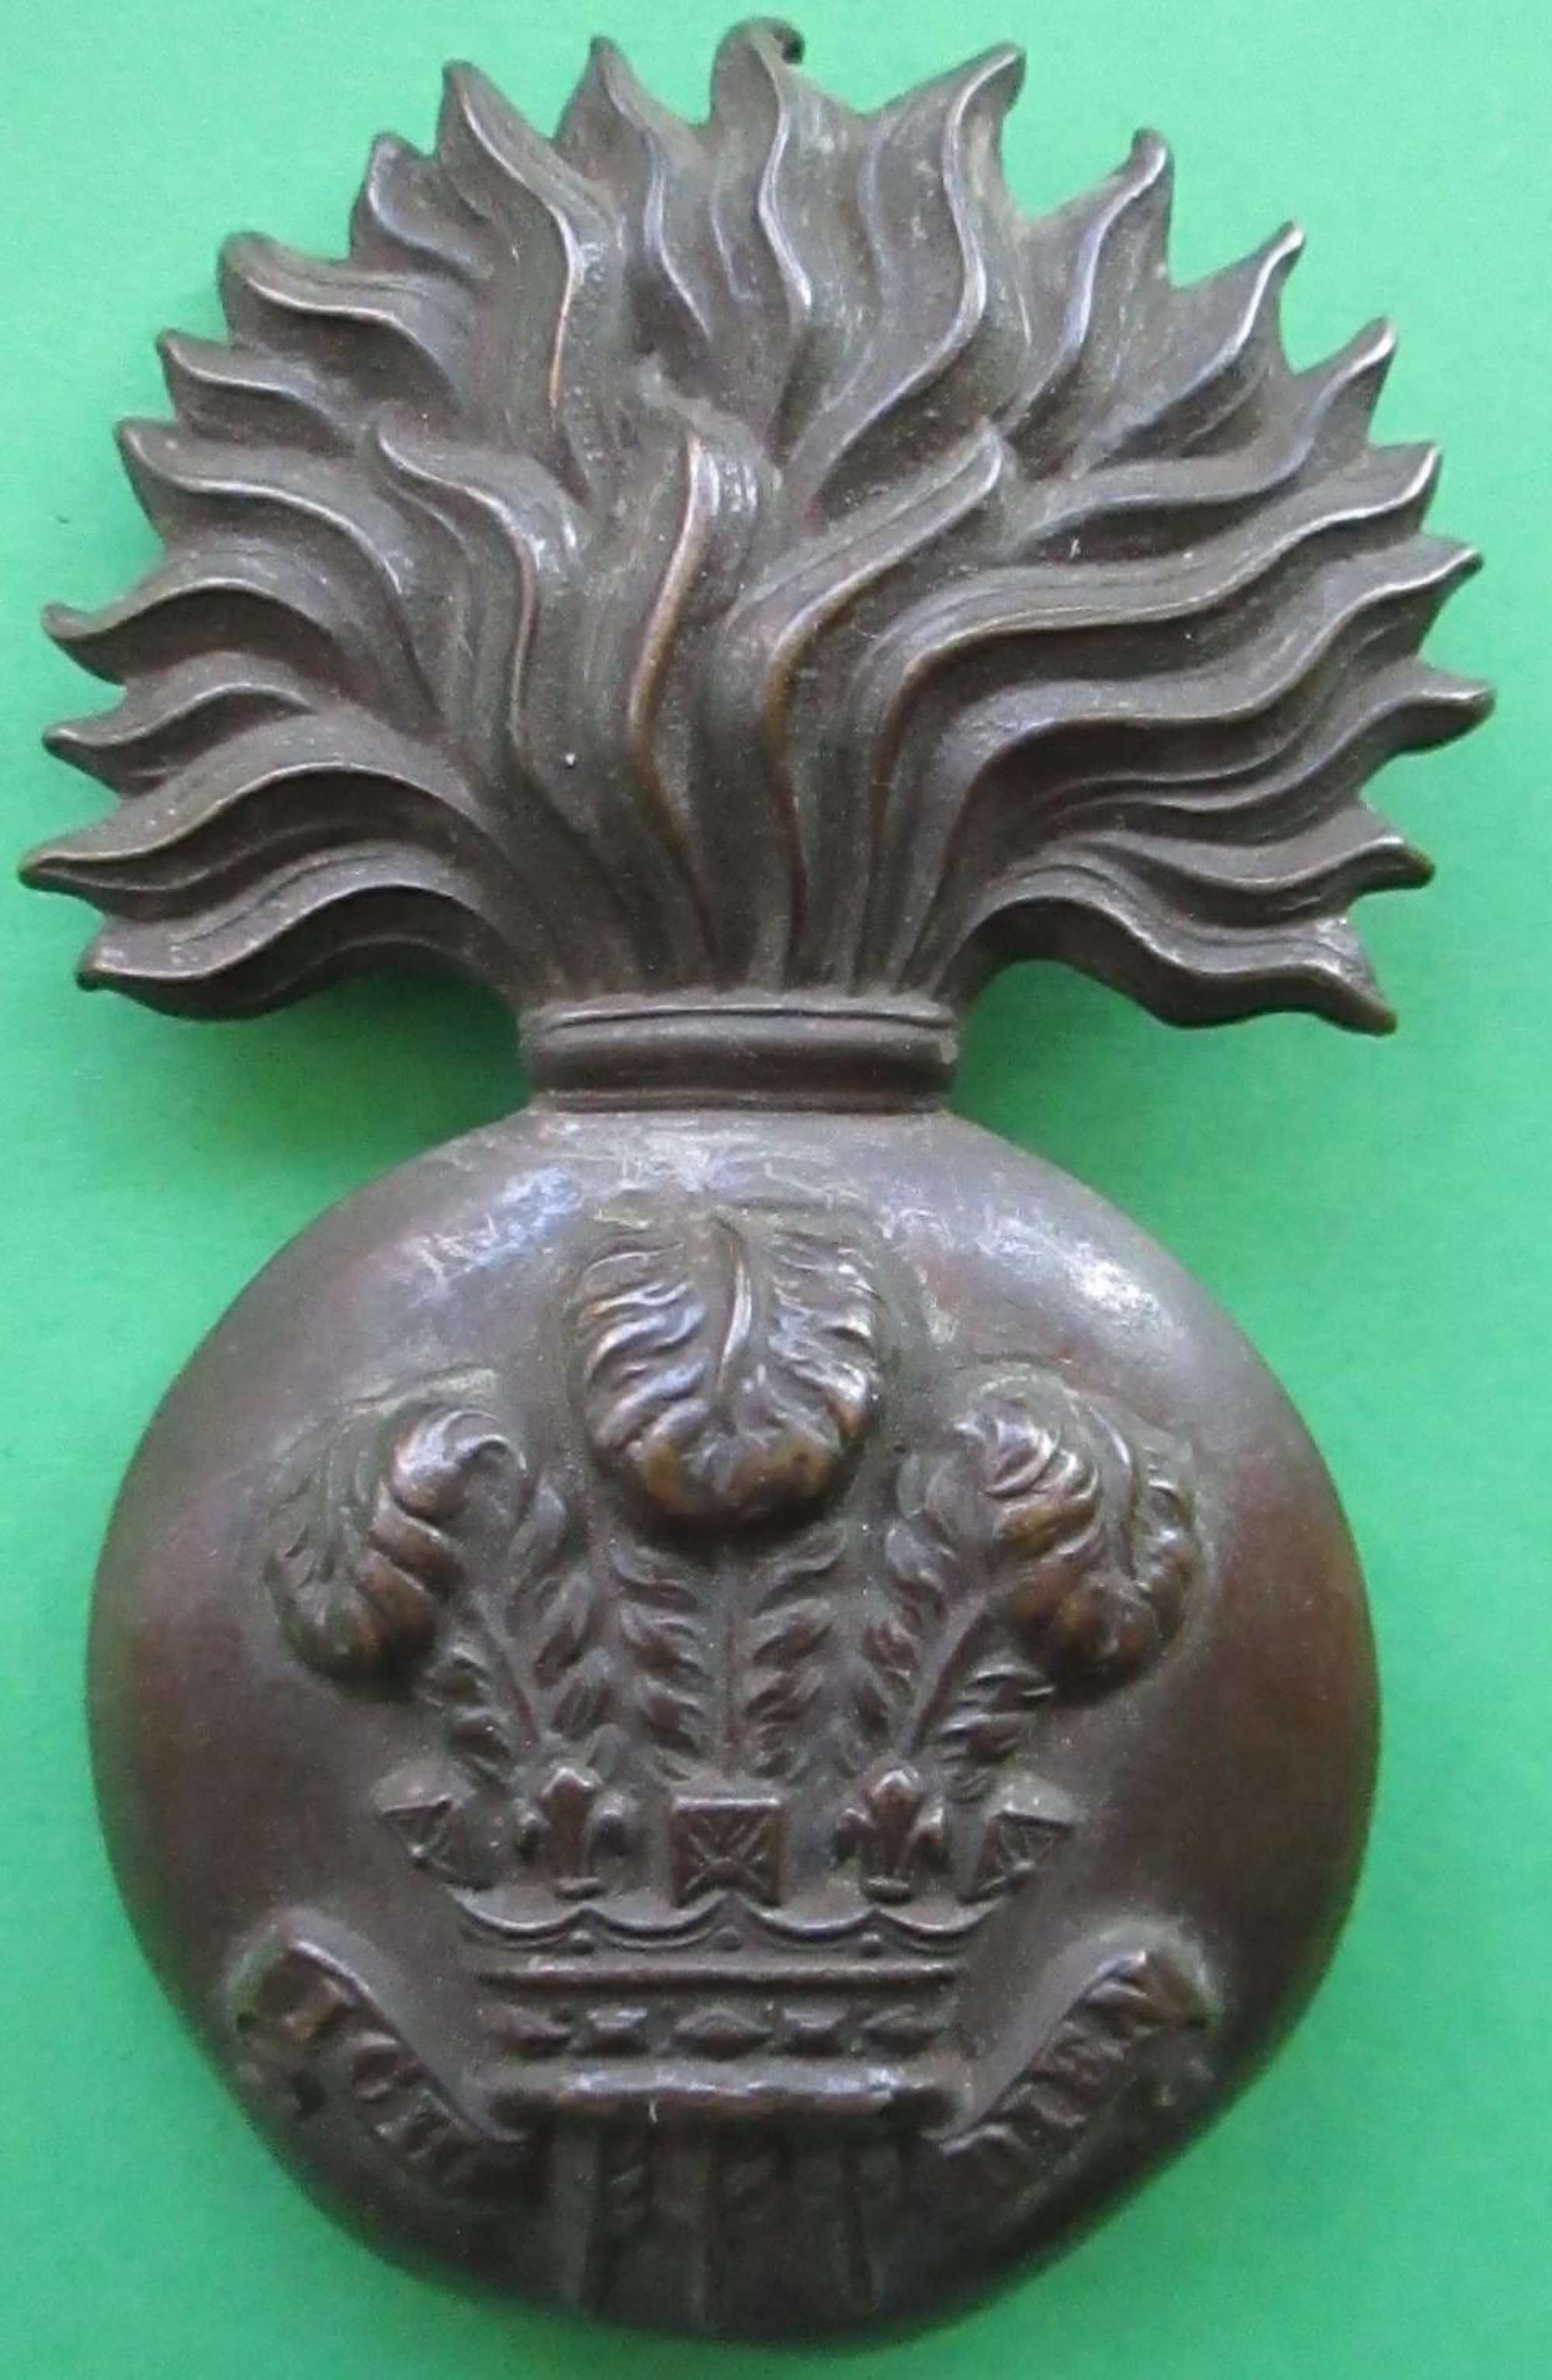 A ROYAL WELSH FUSILIERS FUSE BOMB / GRENADE GLENGARRY BADGE